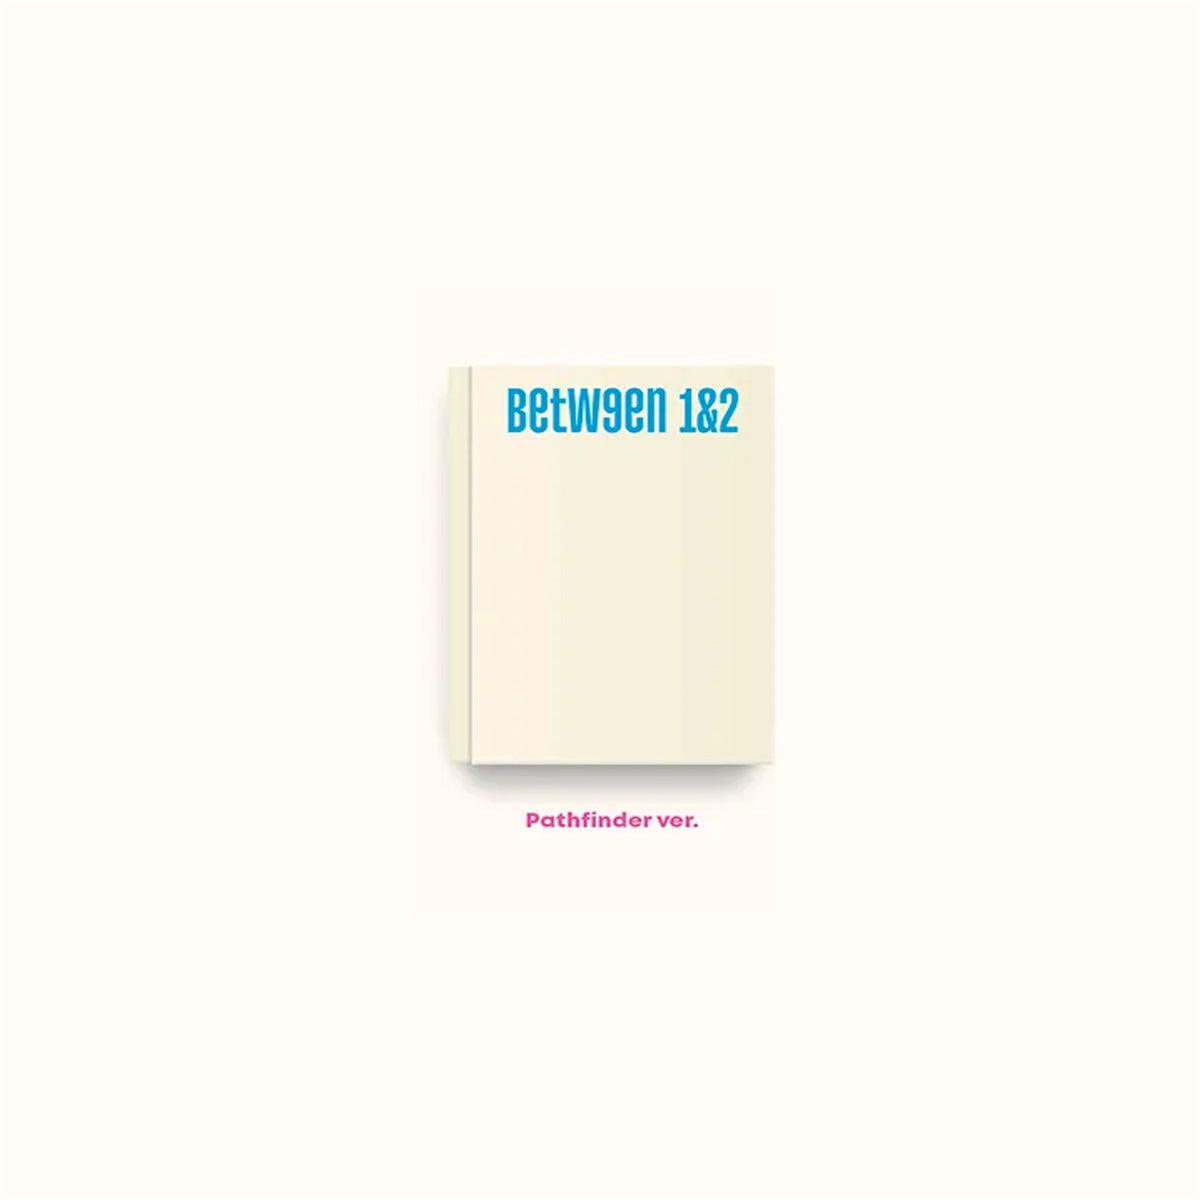 TWICE - 11th Mini Album [BETWEEN 1&2] - KAVE SQUARE